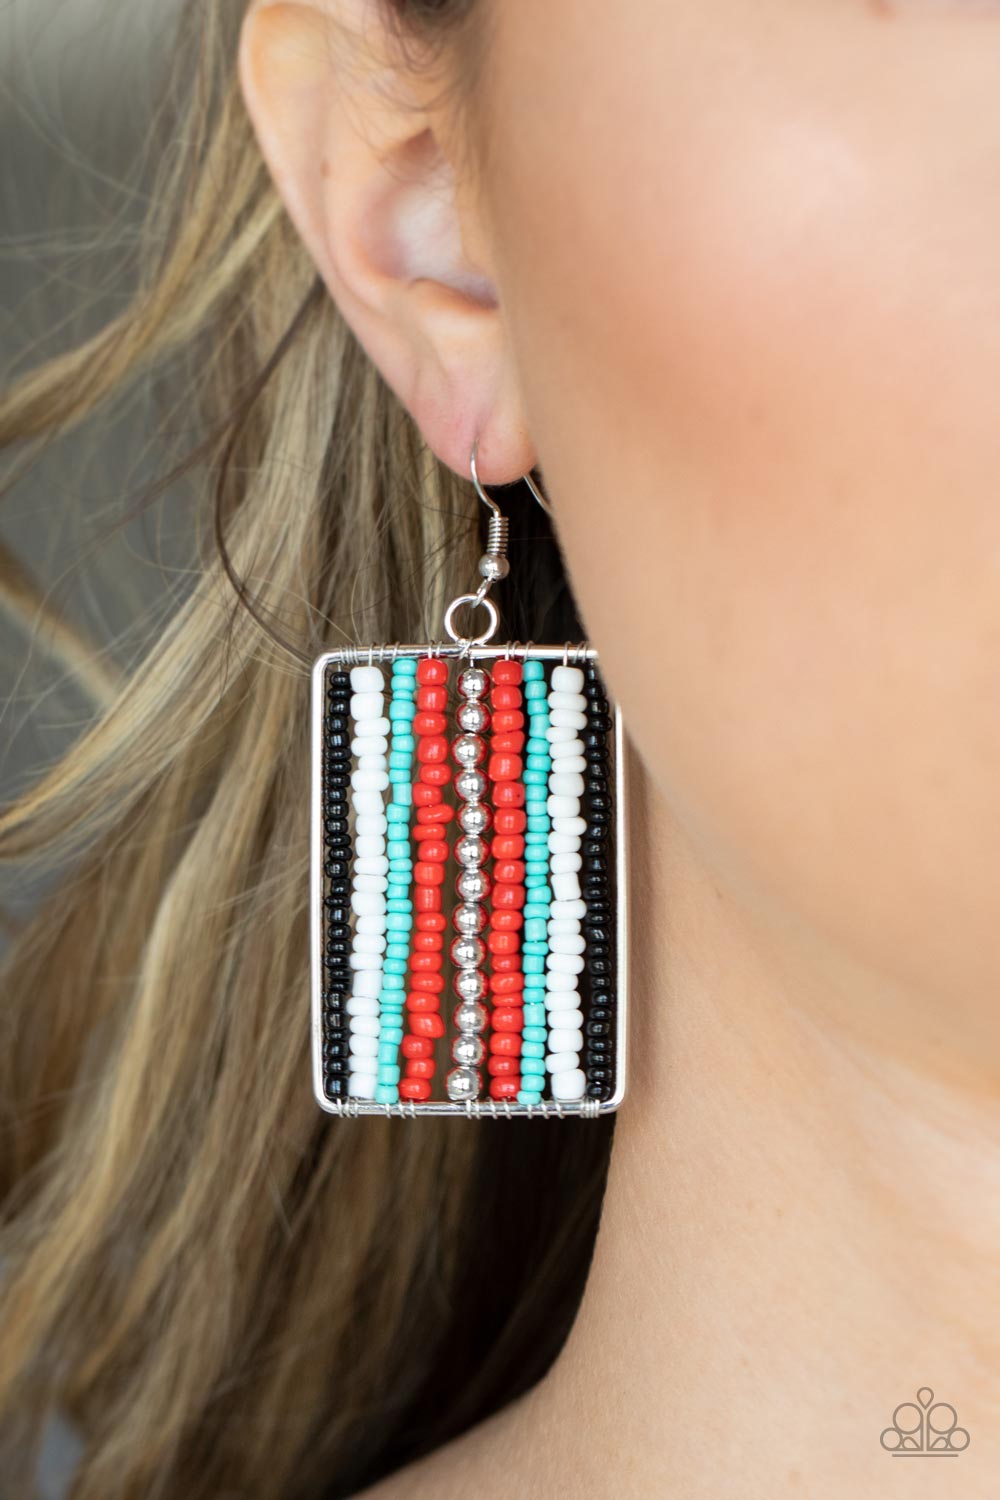 Beadwork Wonder Red Earring - Paparazzi Accessories  Infused with classic silver beads, rows of black, white, blue, and red seed beads are threaded along metal rods inside a rectangular frame for a colorful artisan inspired look. Earring attaches to a standard fishhook fitting.  Sold as one pair of earrings.